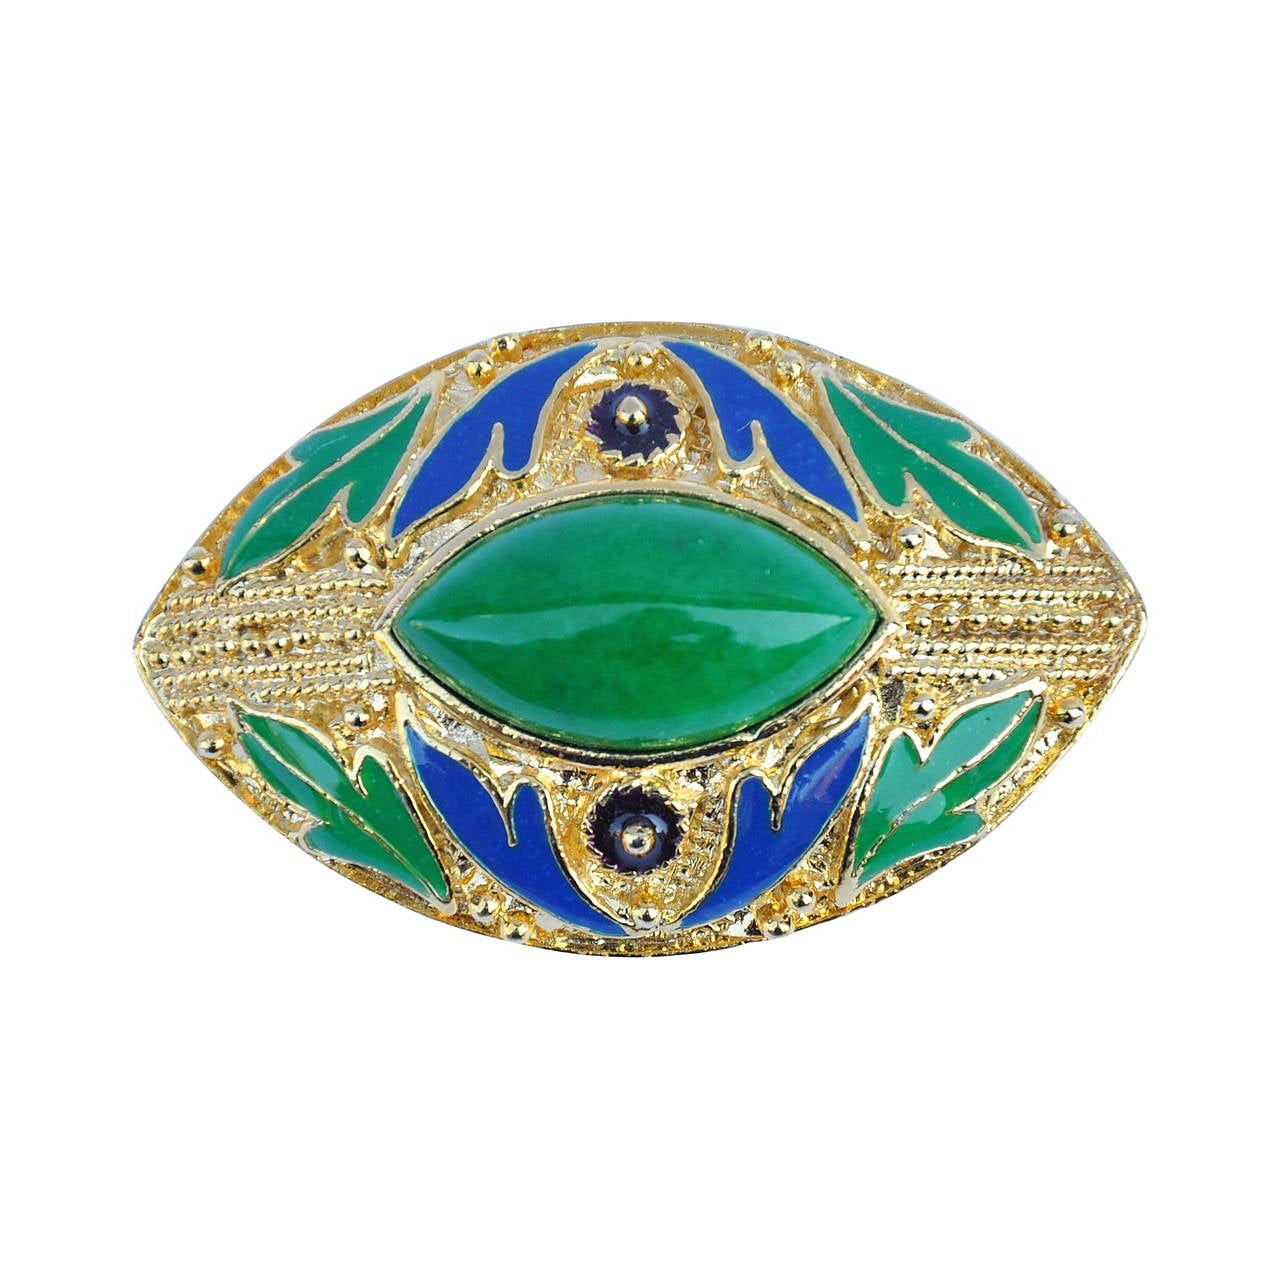 Gold with Blue & Green Enamel Accented with large Jadeite Stone Brooch